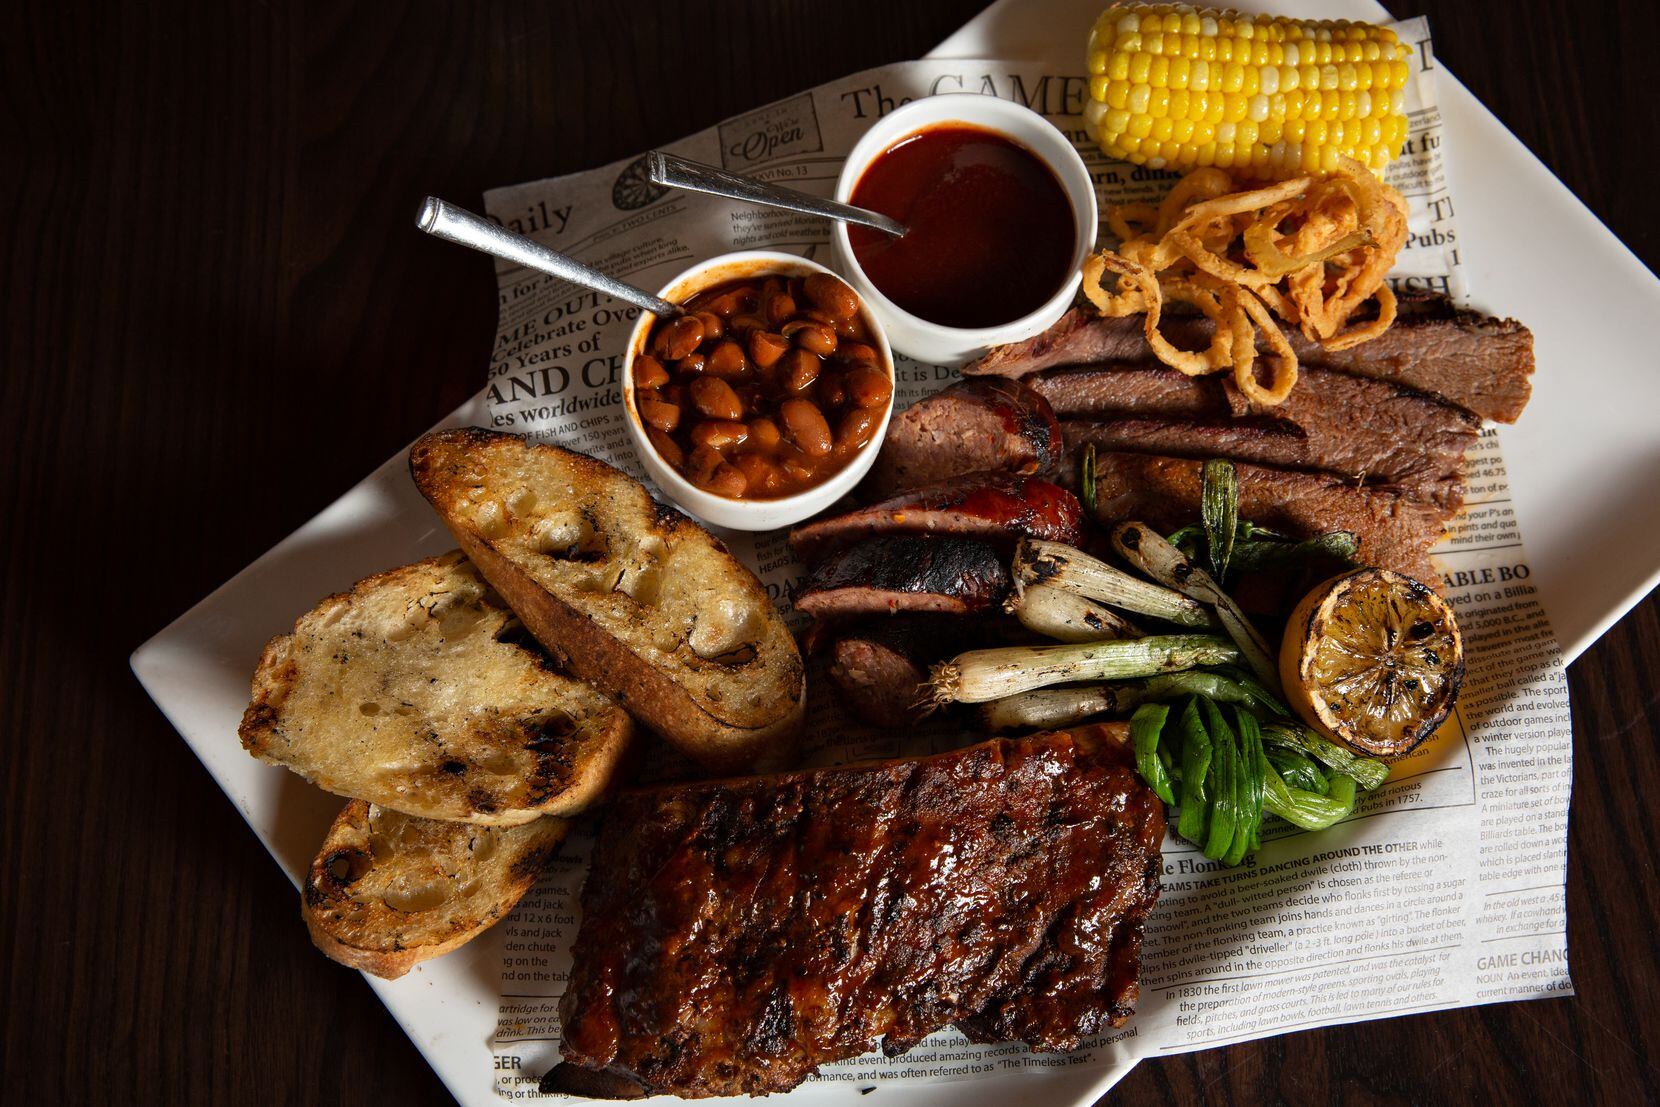 Jasper's barbecue sampler with slow smoked baby back ribs, brisket, sausage, baked beans and corn on the cob. Jasper's in Richardson is serving up a multi-course menu for Father's Day. Fathers have the option to dine-in to take the food home to enjoy on the couch.